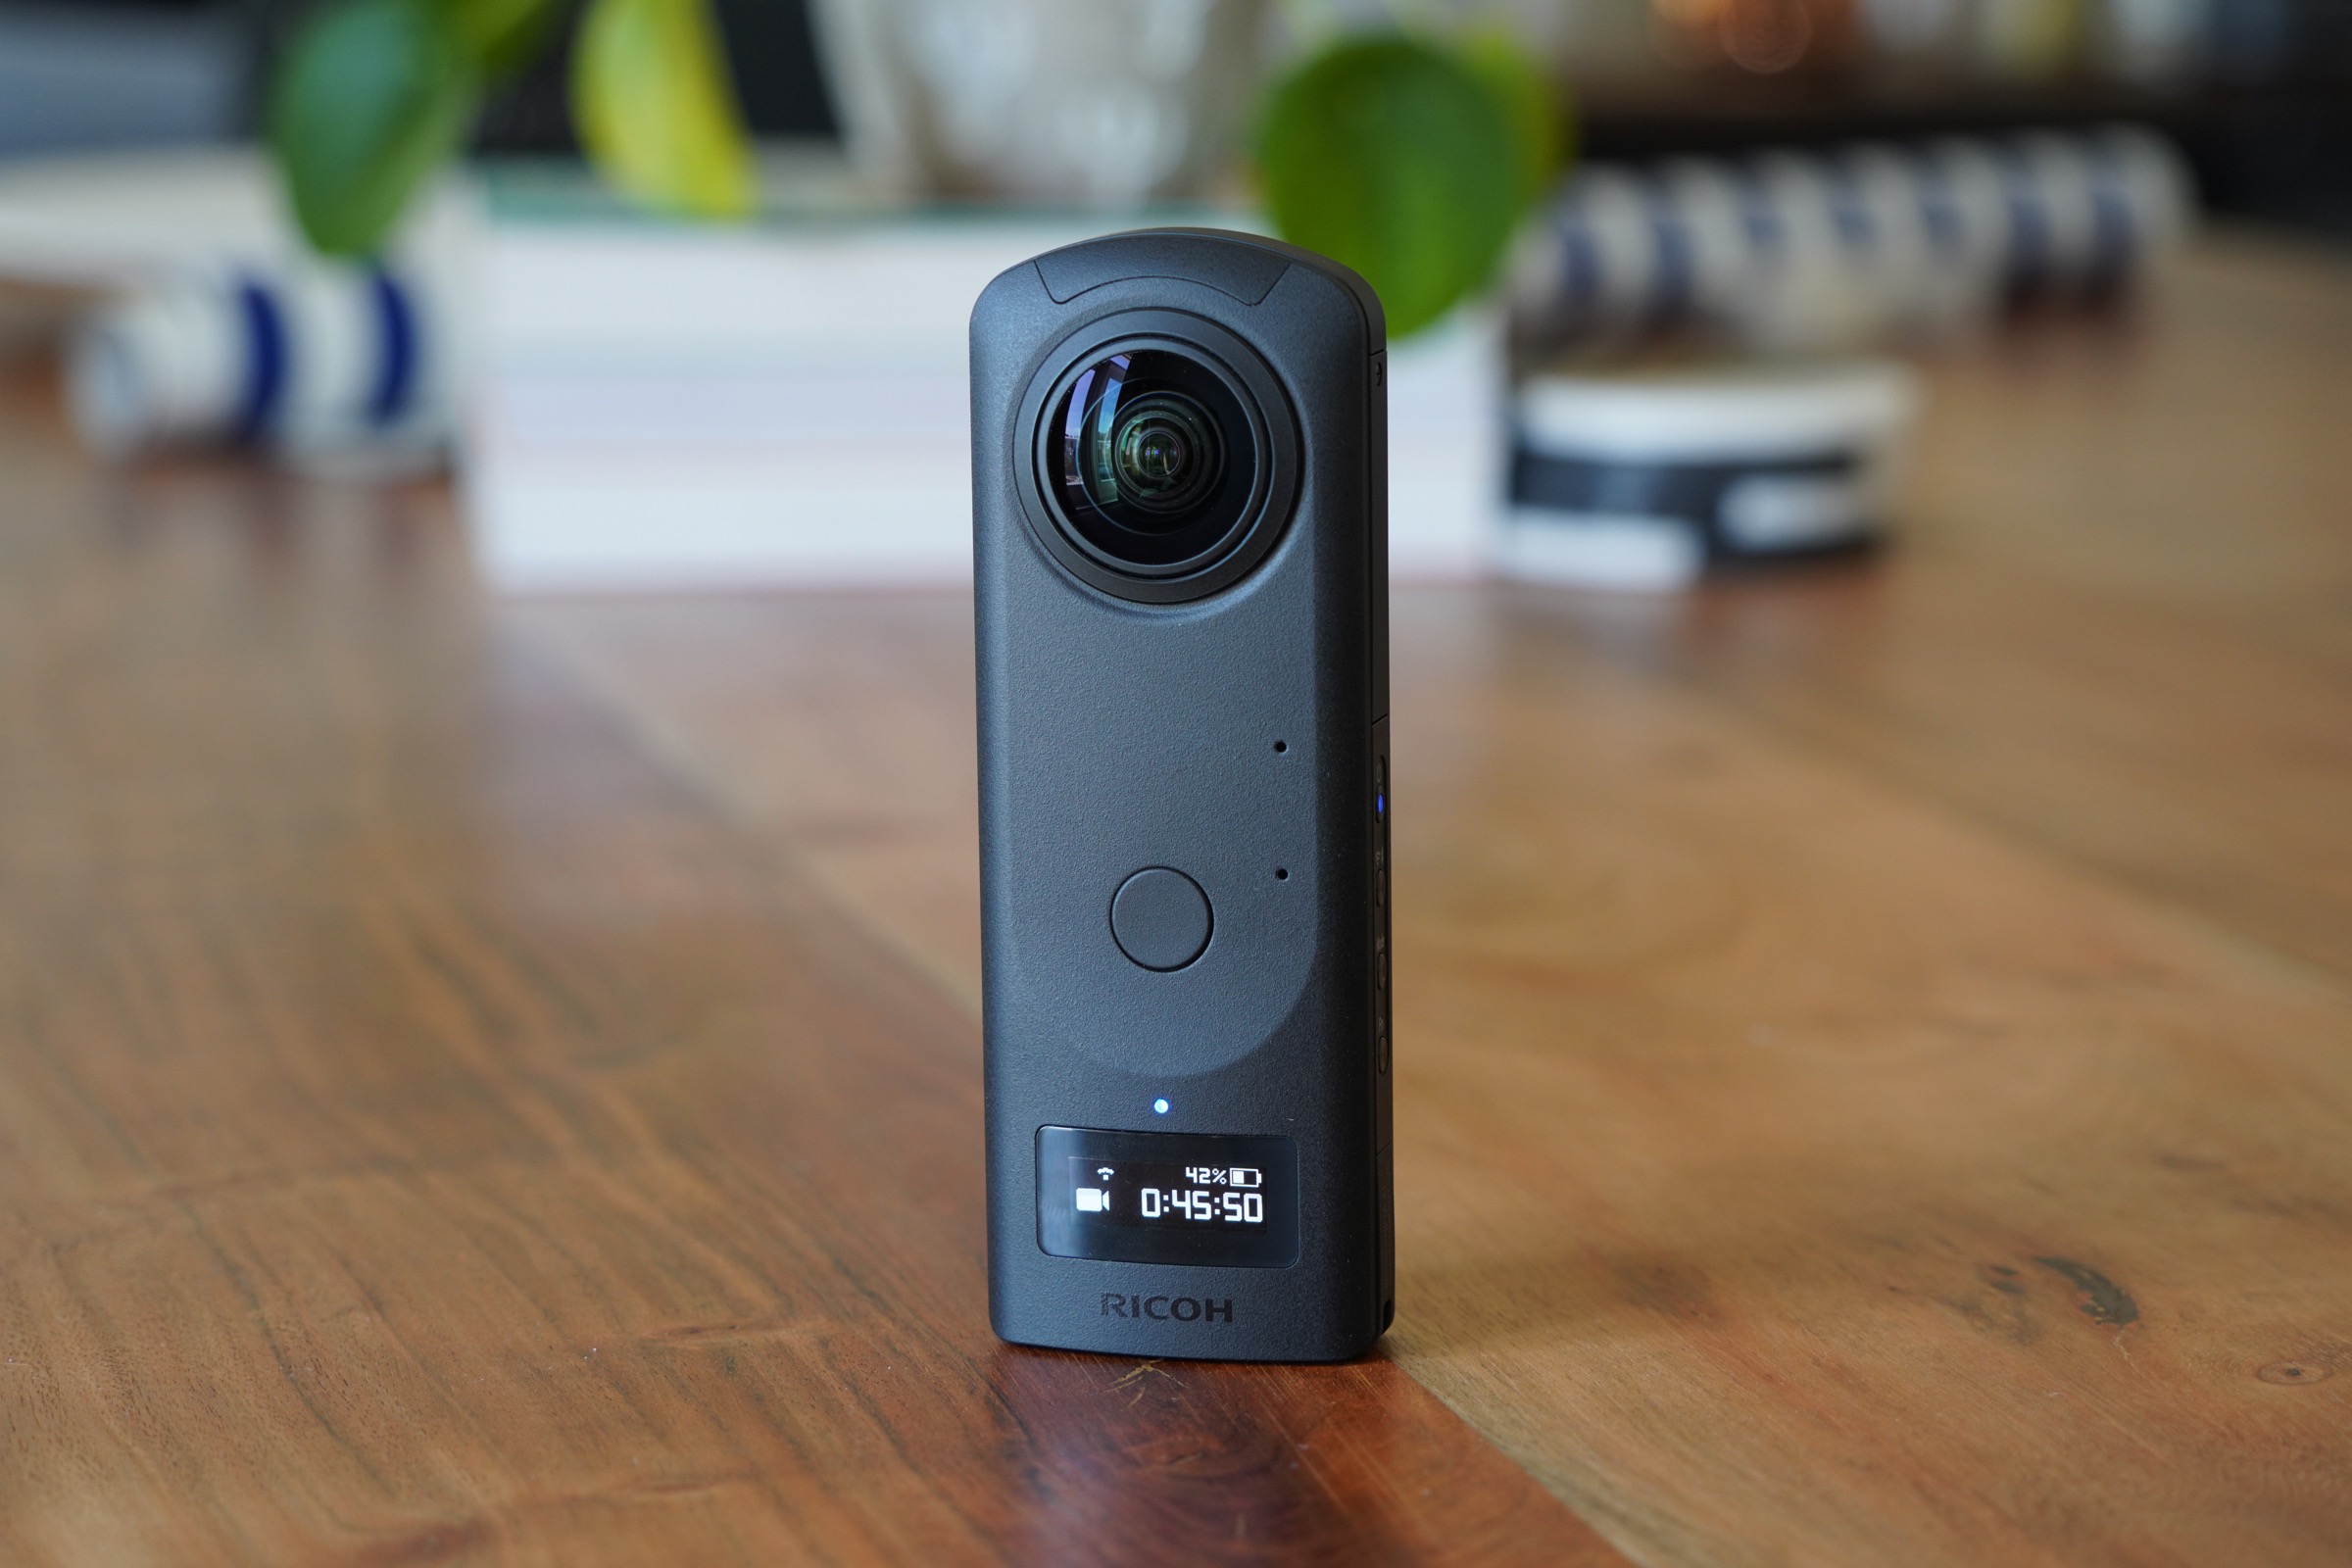 Ricoh's Theta Z1 is the first truly premium consumer 360 camera